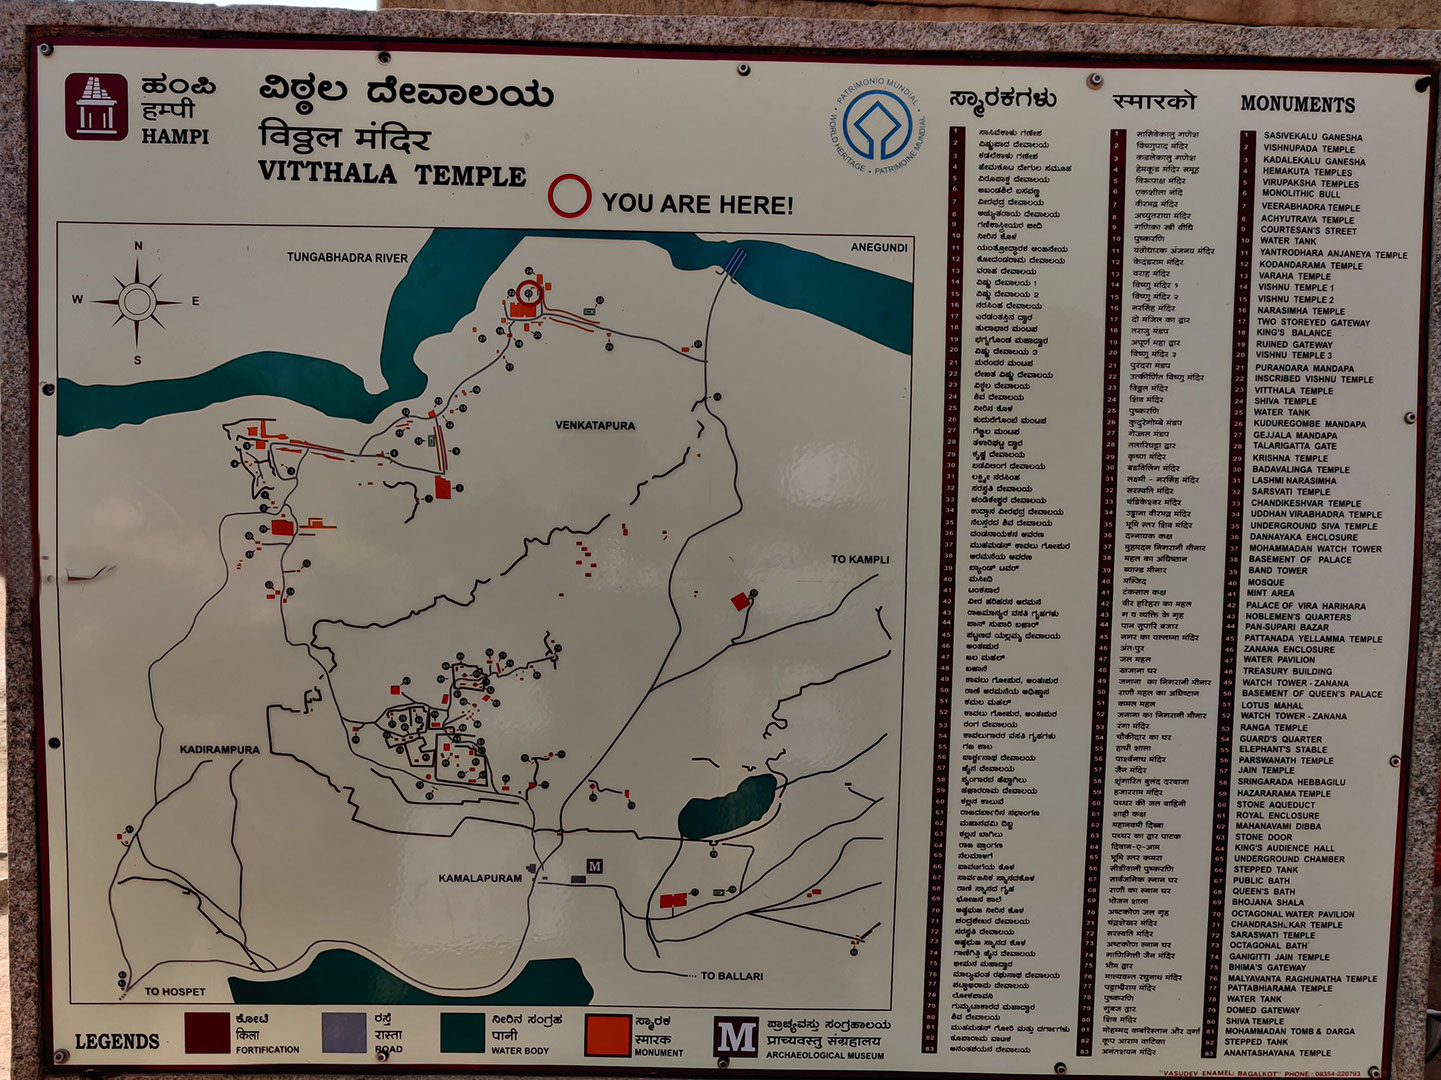 List of Monuments at Vitthala Temple in and around Hampi